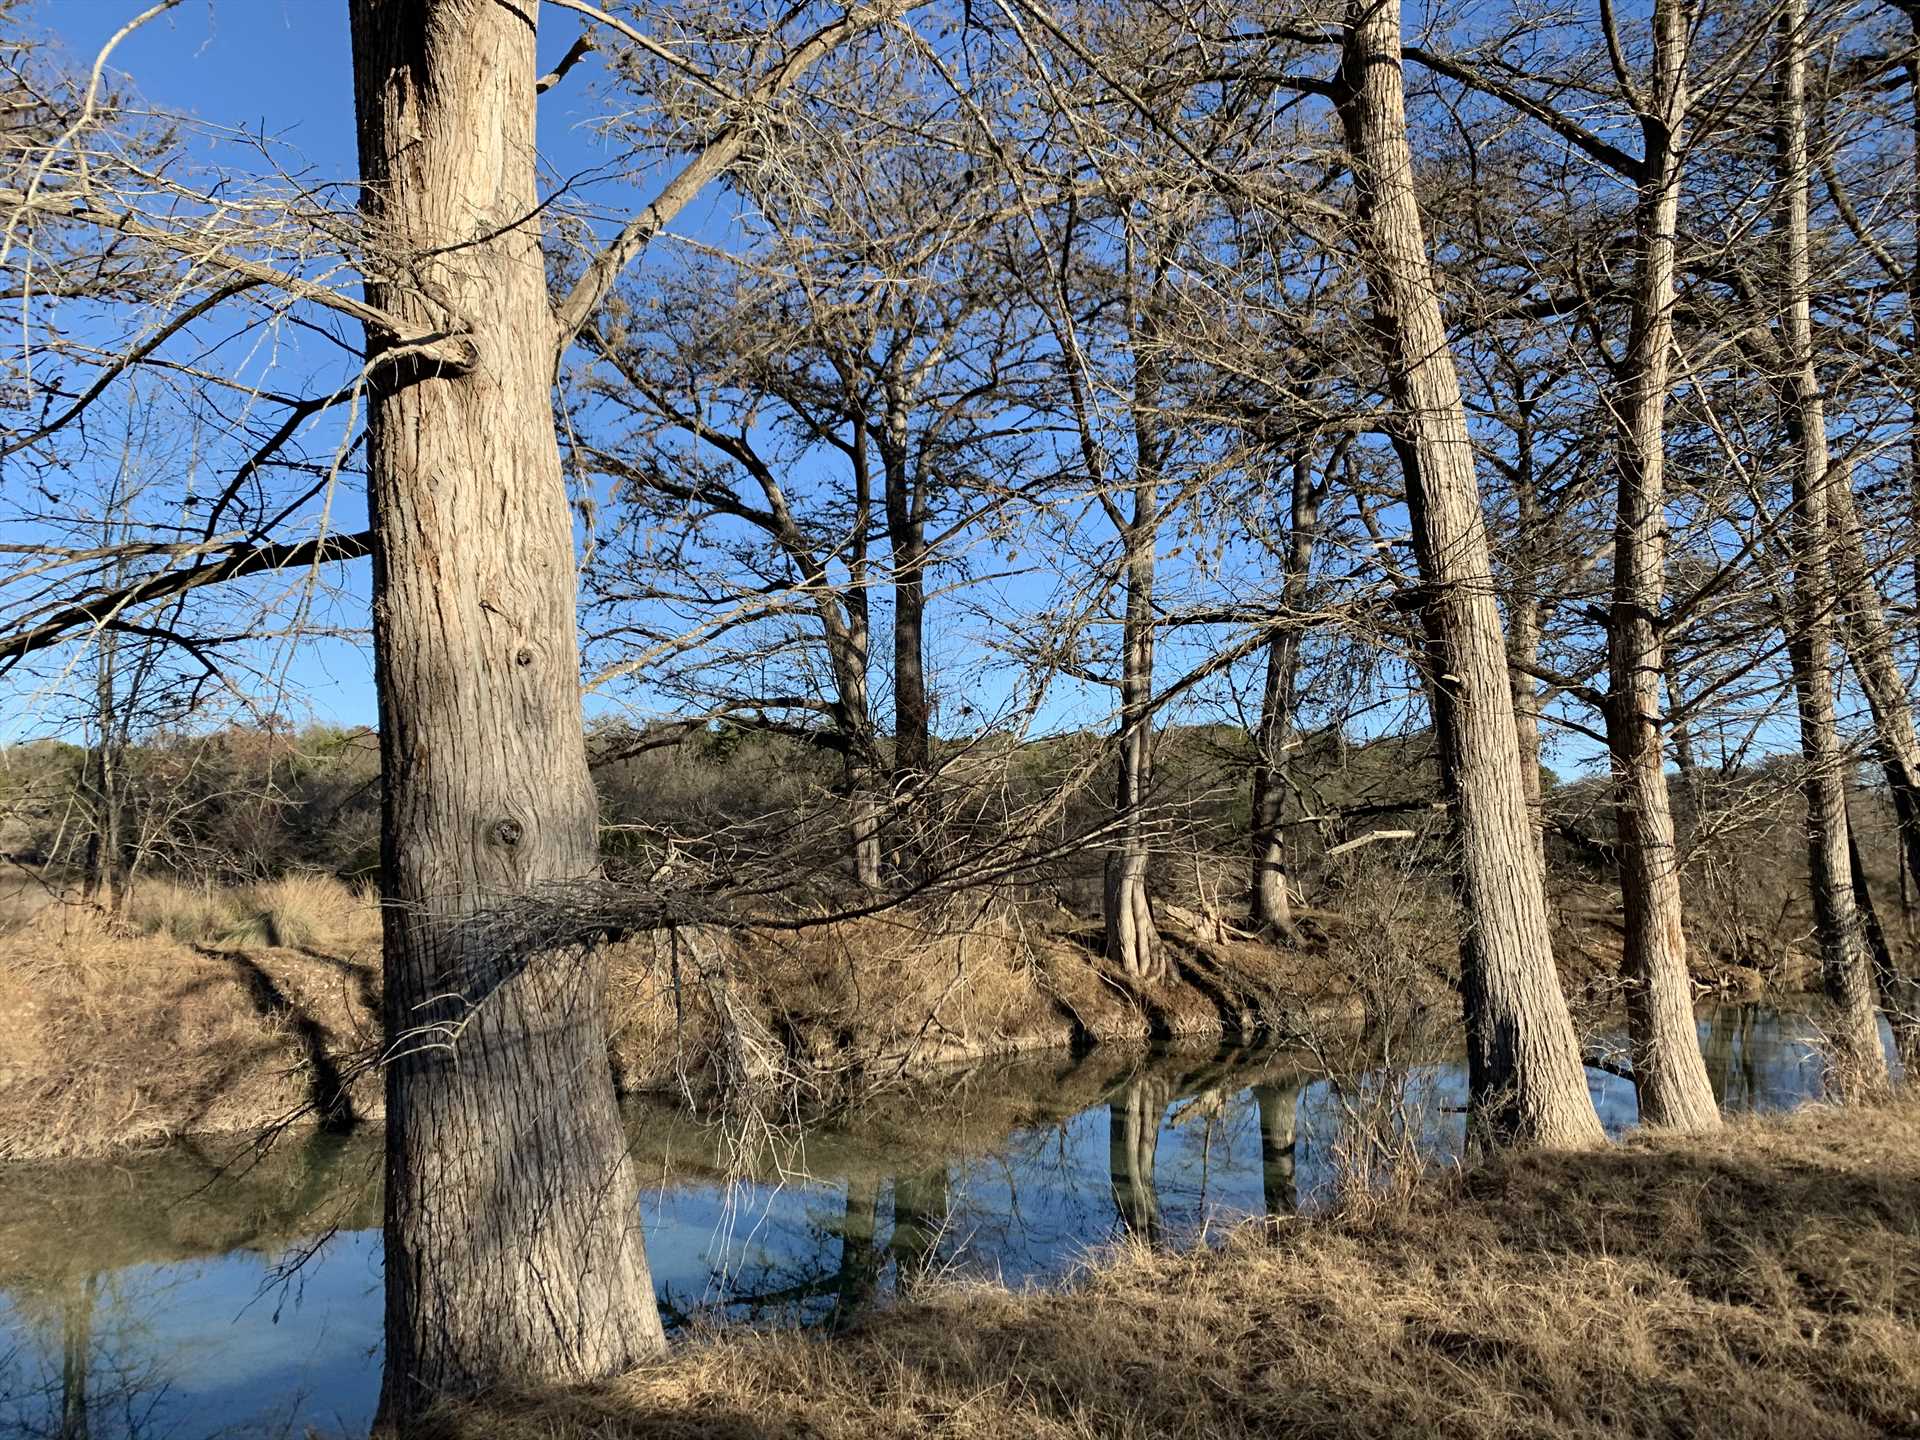                                                 Fish, swim, and hike the tree-lined banks of the Medina! There's tons of wildlife here, and plenty of shady spots where you can clear your mind.